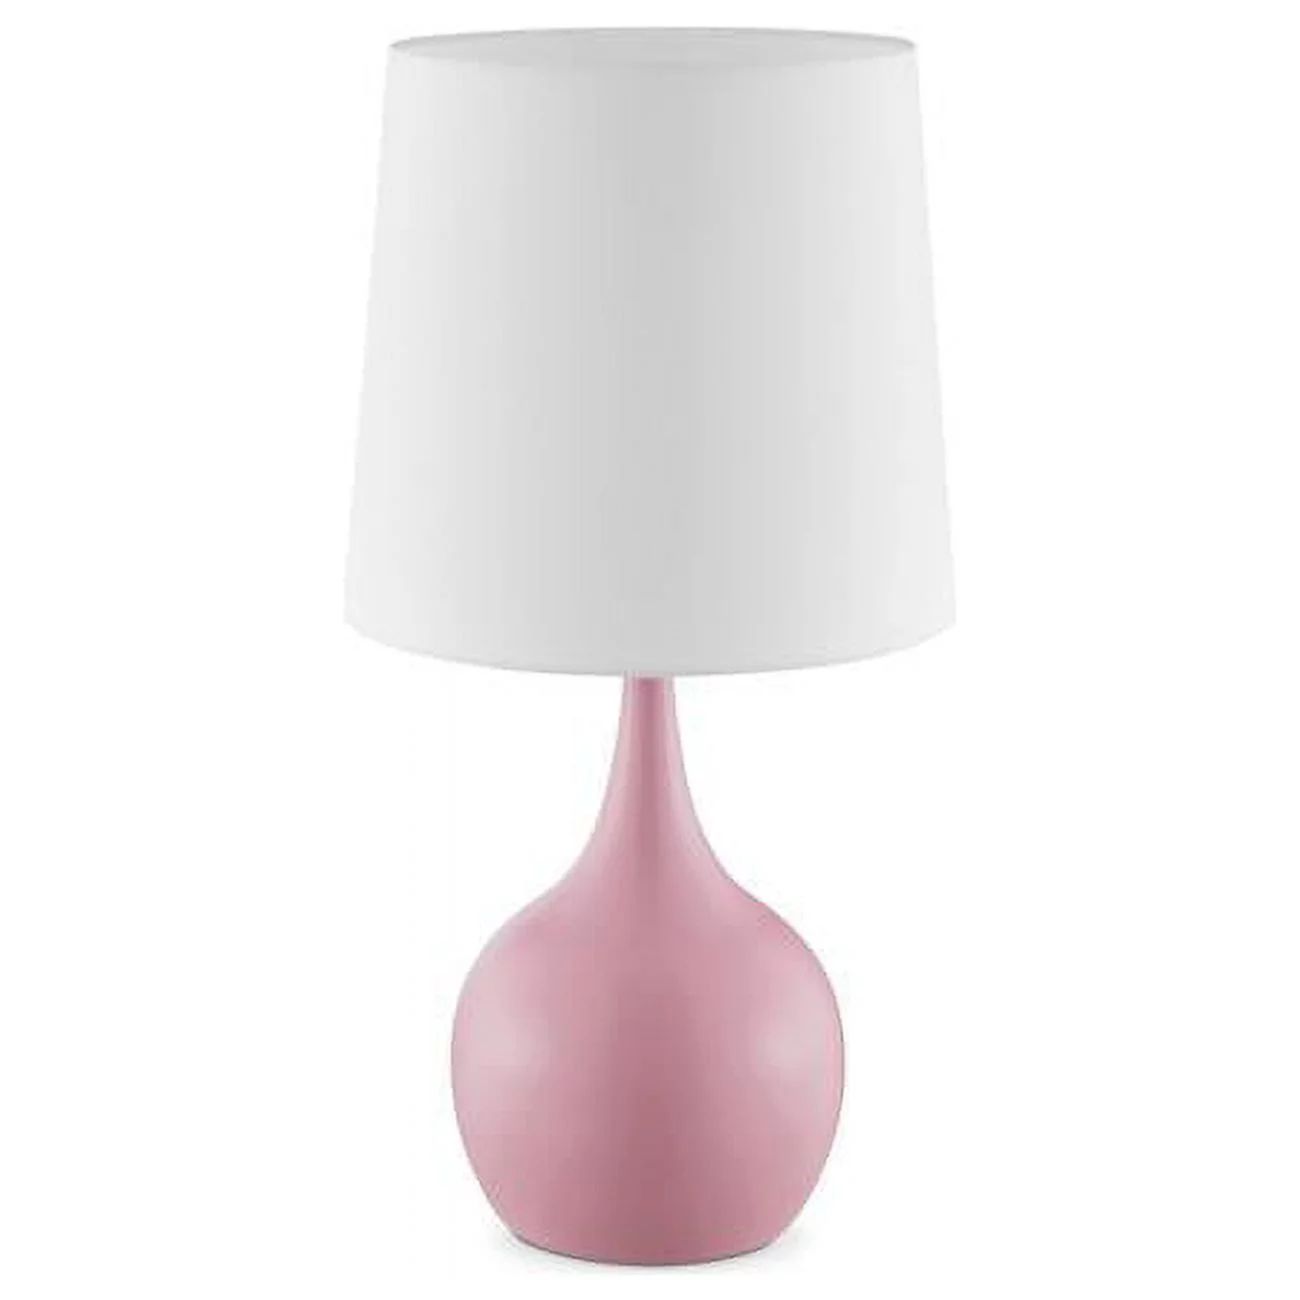 HomeRoots 468790 Minimalist Light Pink Table Lamp with Touch Switch | Walmart (US)